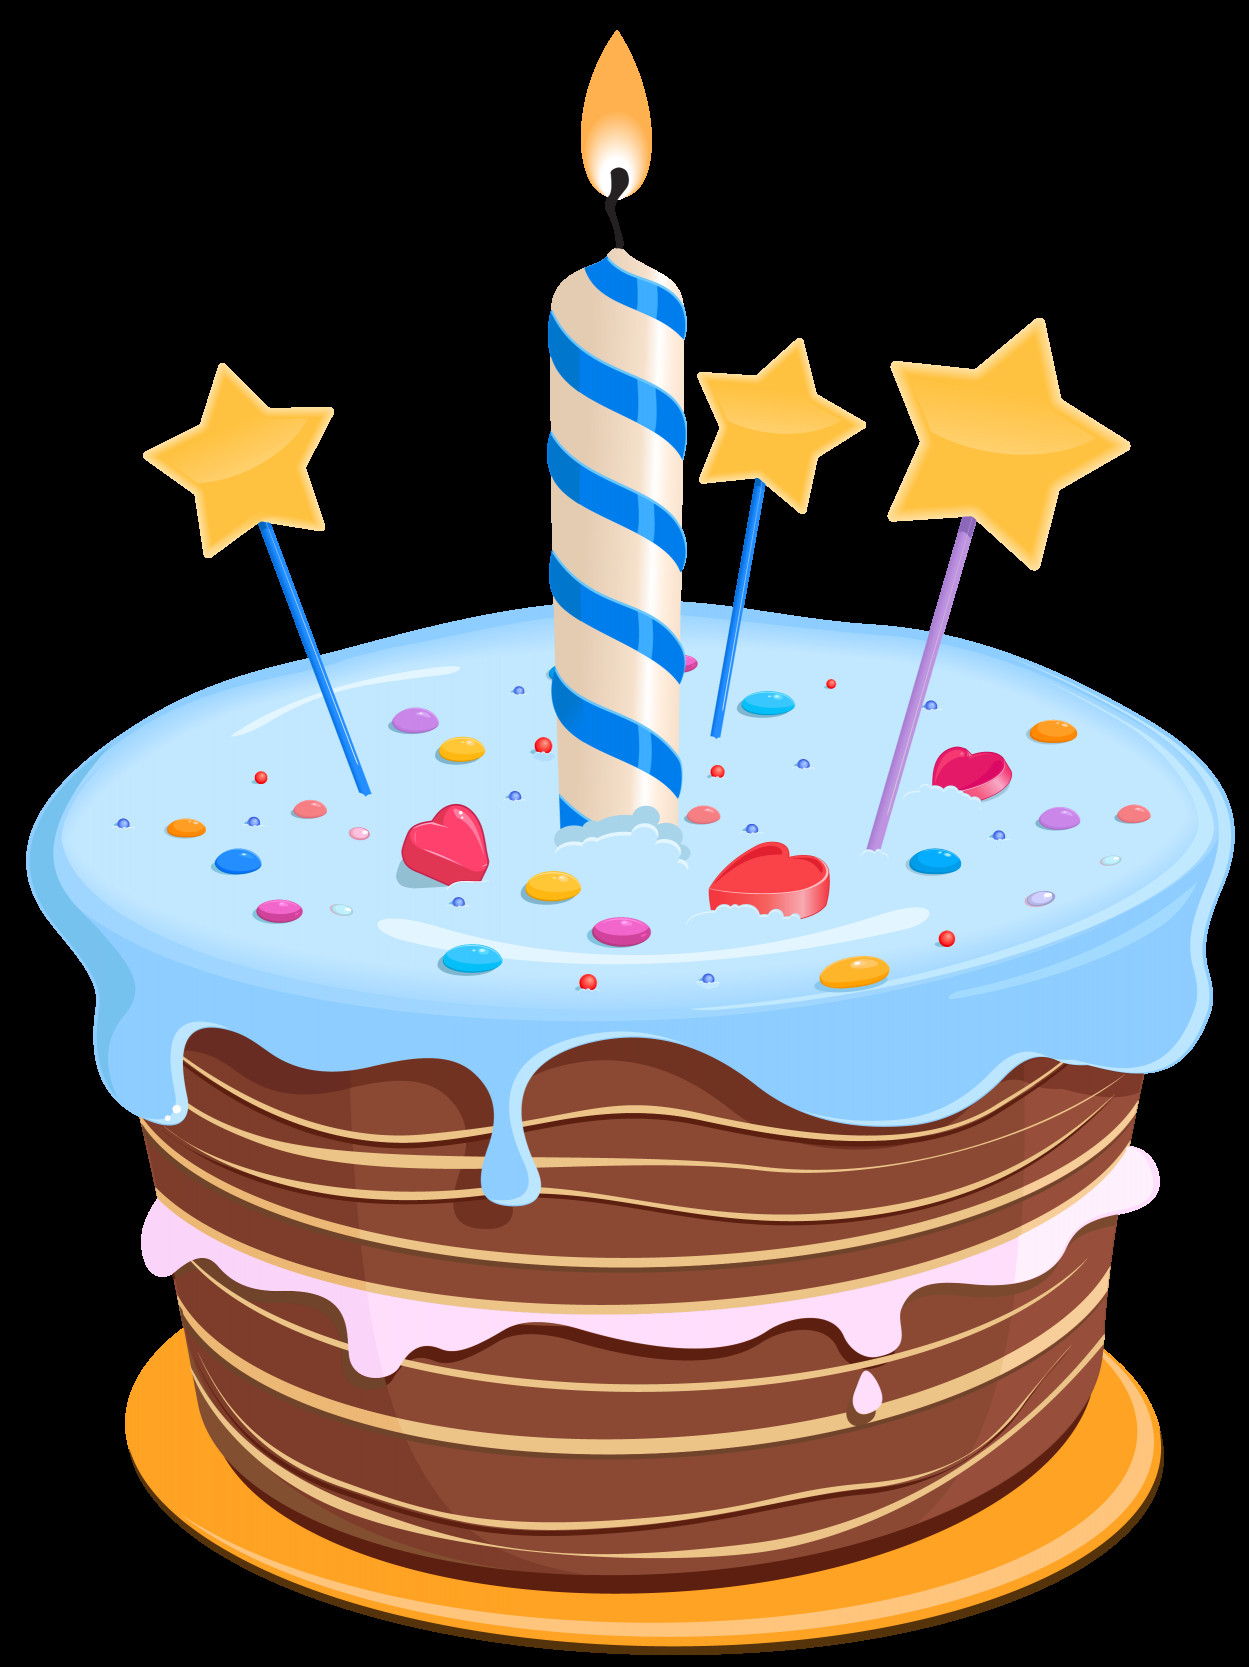 Birthday Cake Icon
 Download Birthday Cake Clipart HQ PNG Image